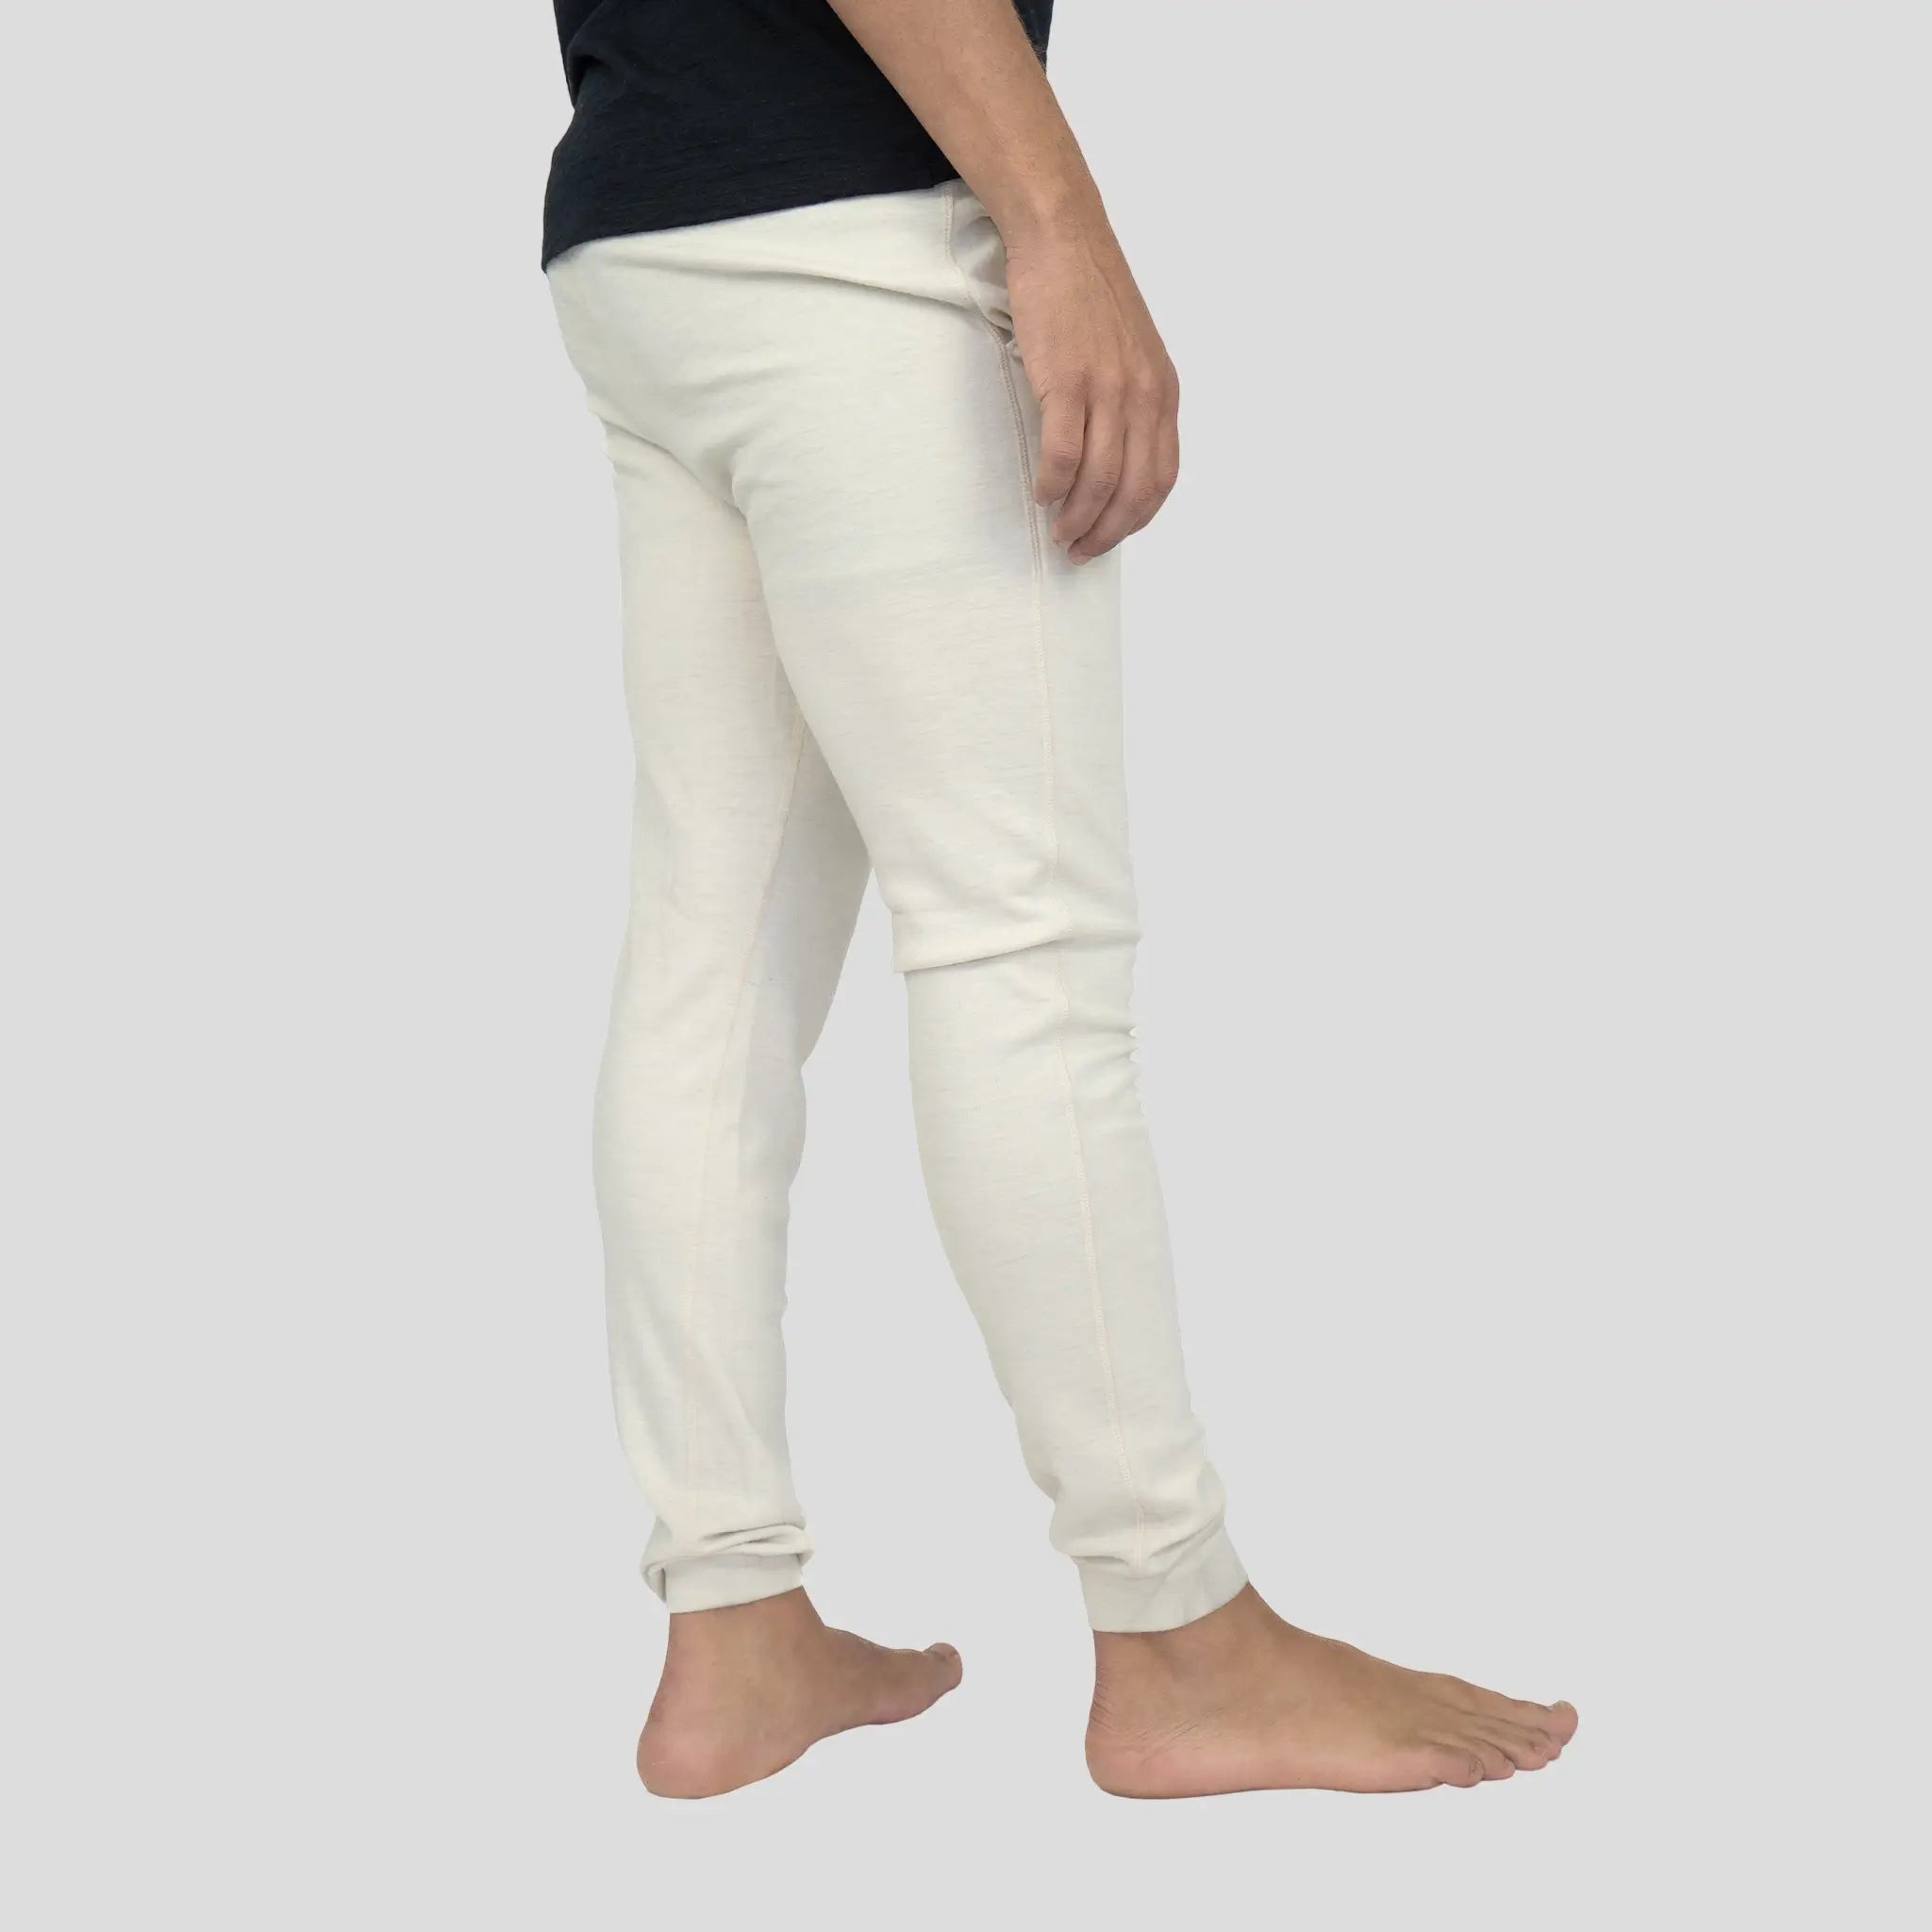 Men's Alpaca Wool Joggers: 300 Lightweight color Natural White